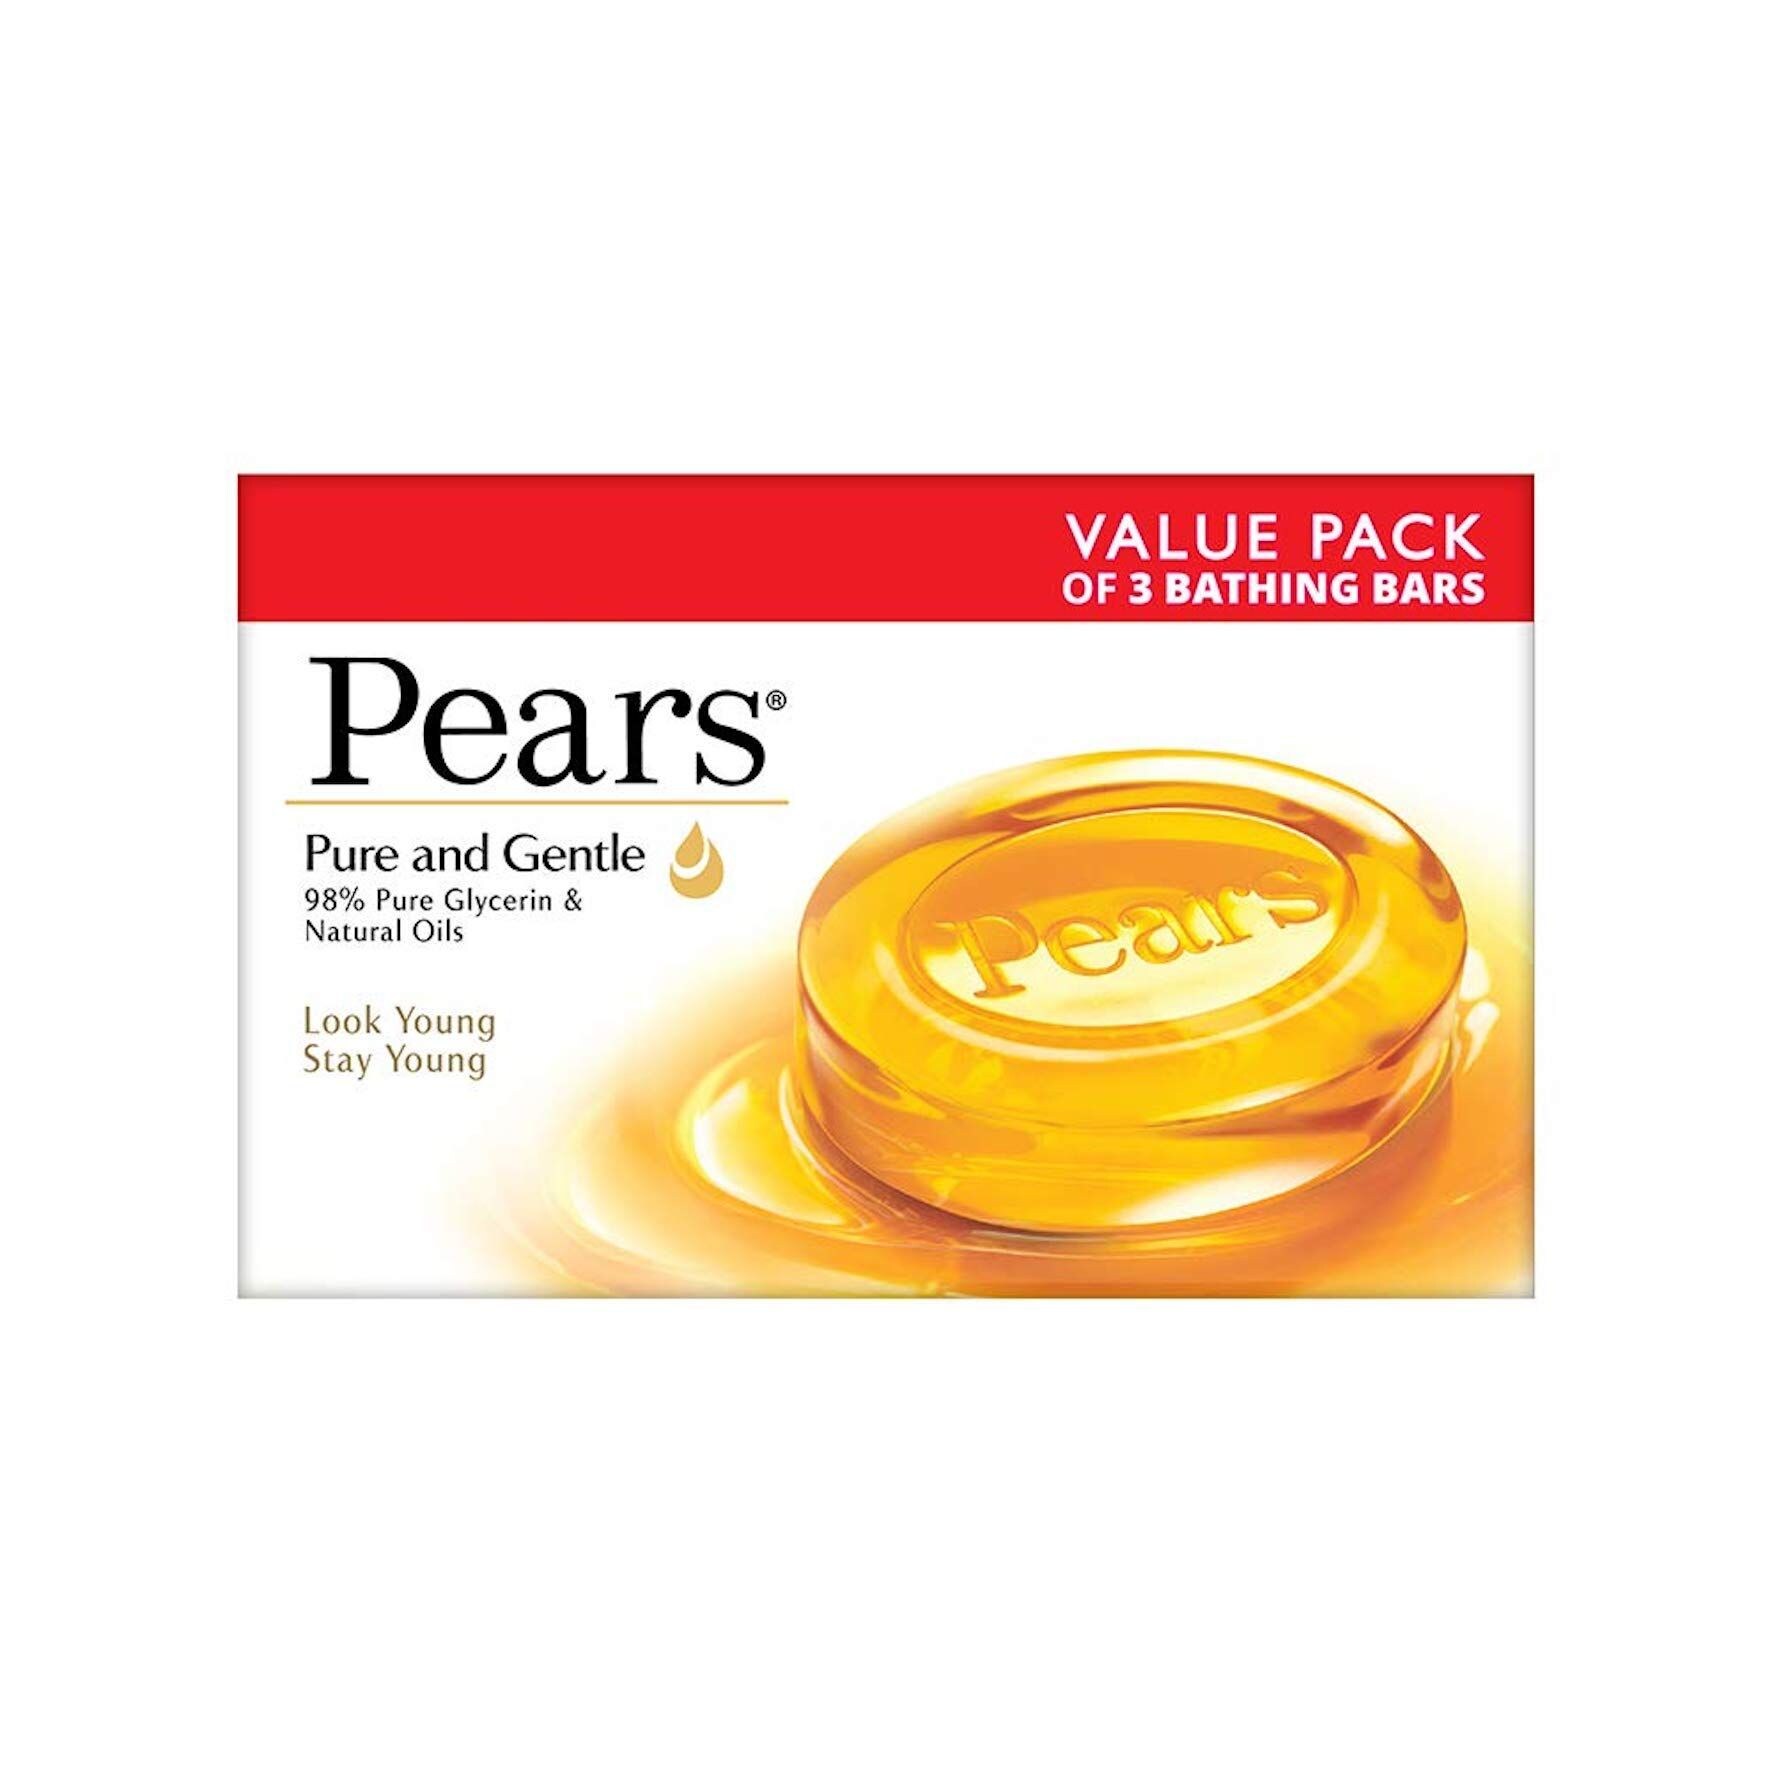 Pears Pure And Gentle Soap Bar, 125g, Carton Of 48 Pcs